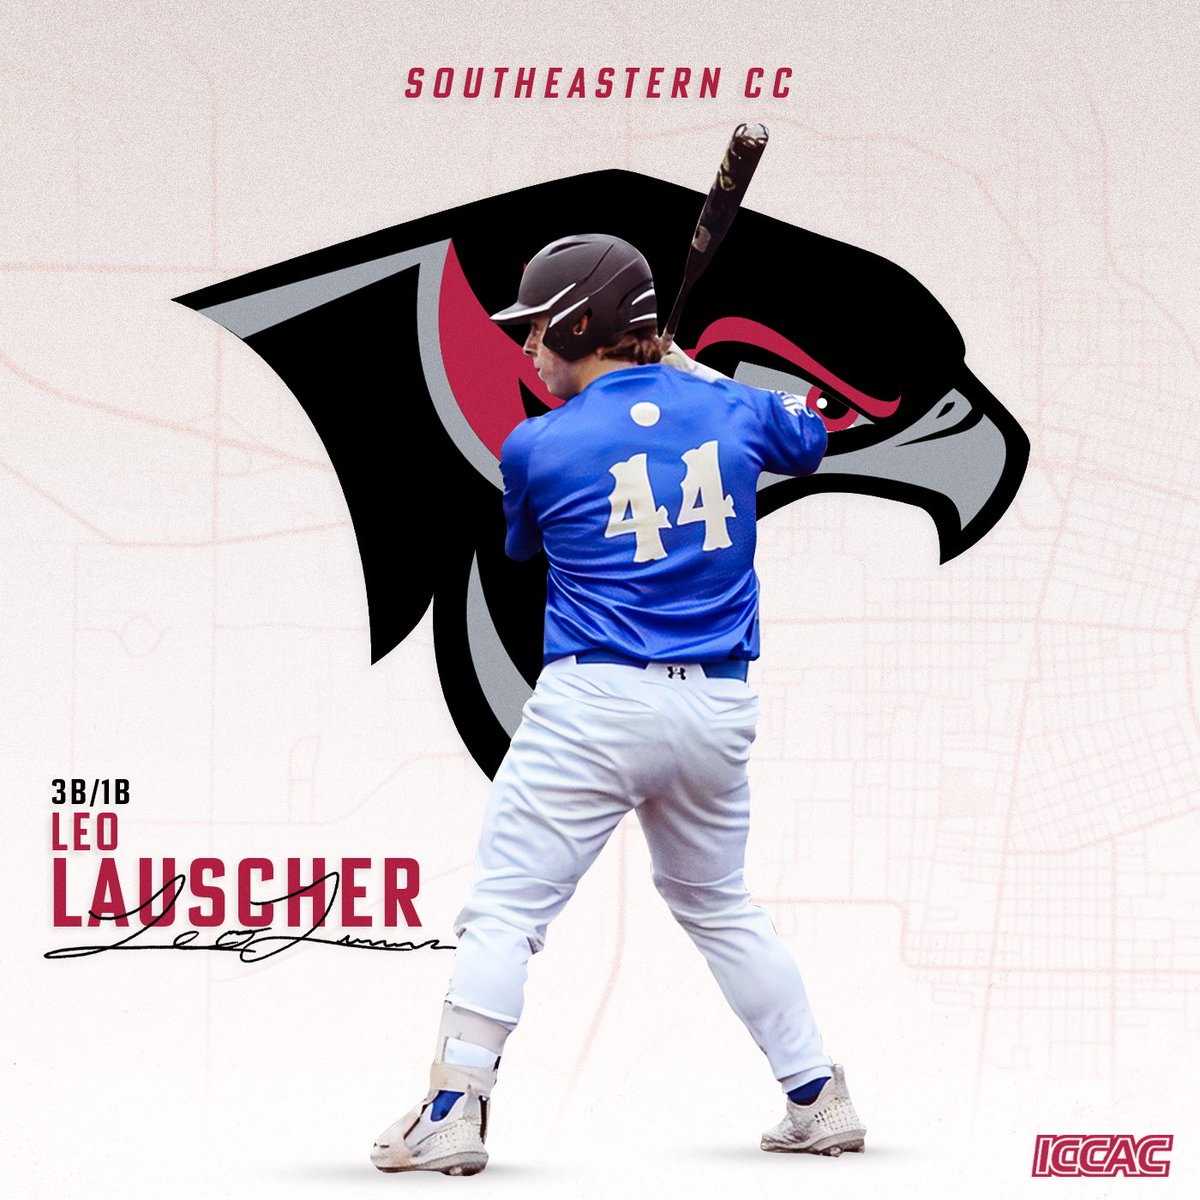 I’m extremely proud and excited to announce my commitment to play baseball and further my academic career at Southeastern CC. I would like to thank my family, friends, teammates, and coaches for supporting me throughout my journey. #jucobandit